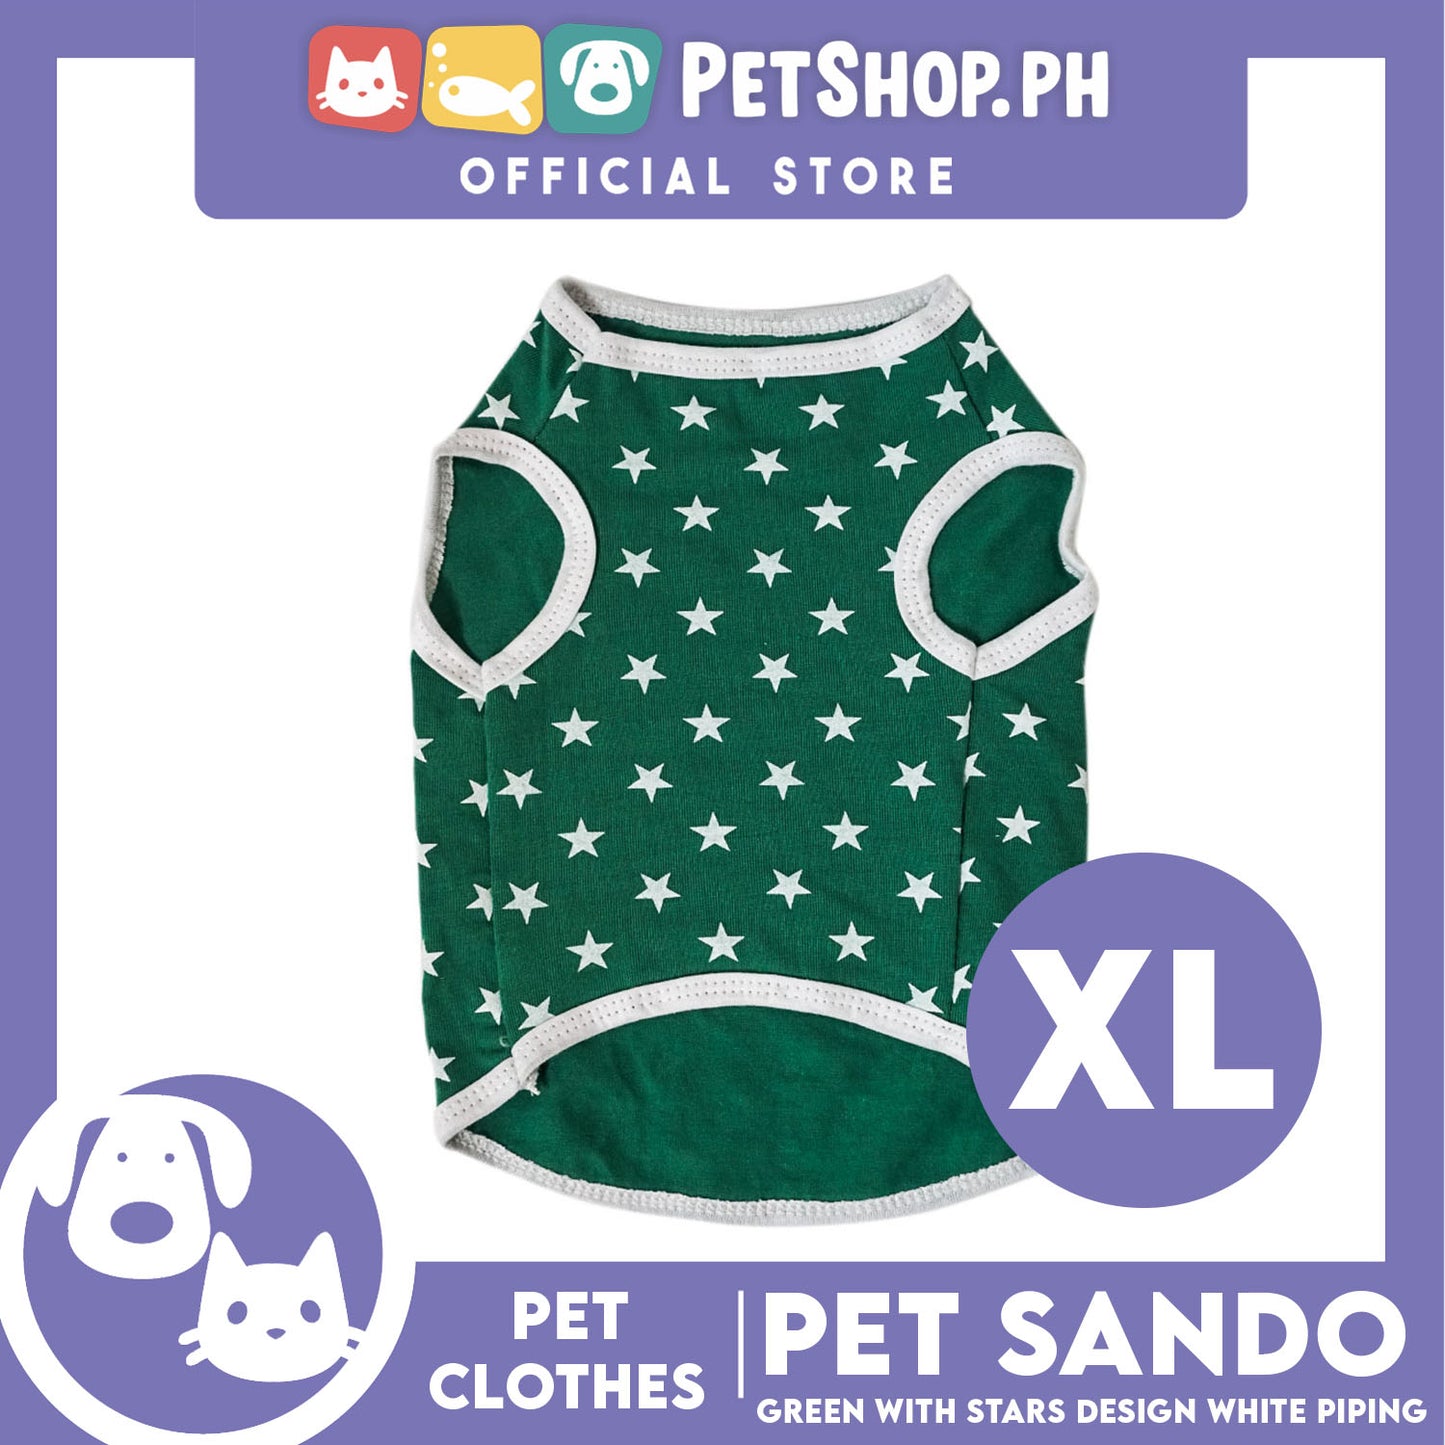 Pet Sando Green with White Stars Design (Extra Large) Pet Clothes Perfect Fit for Dogs